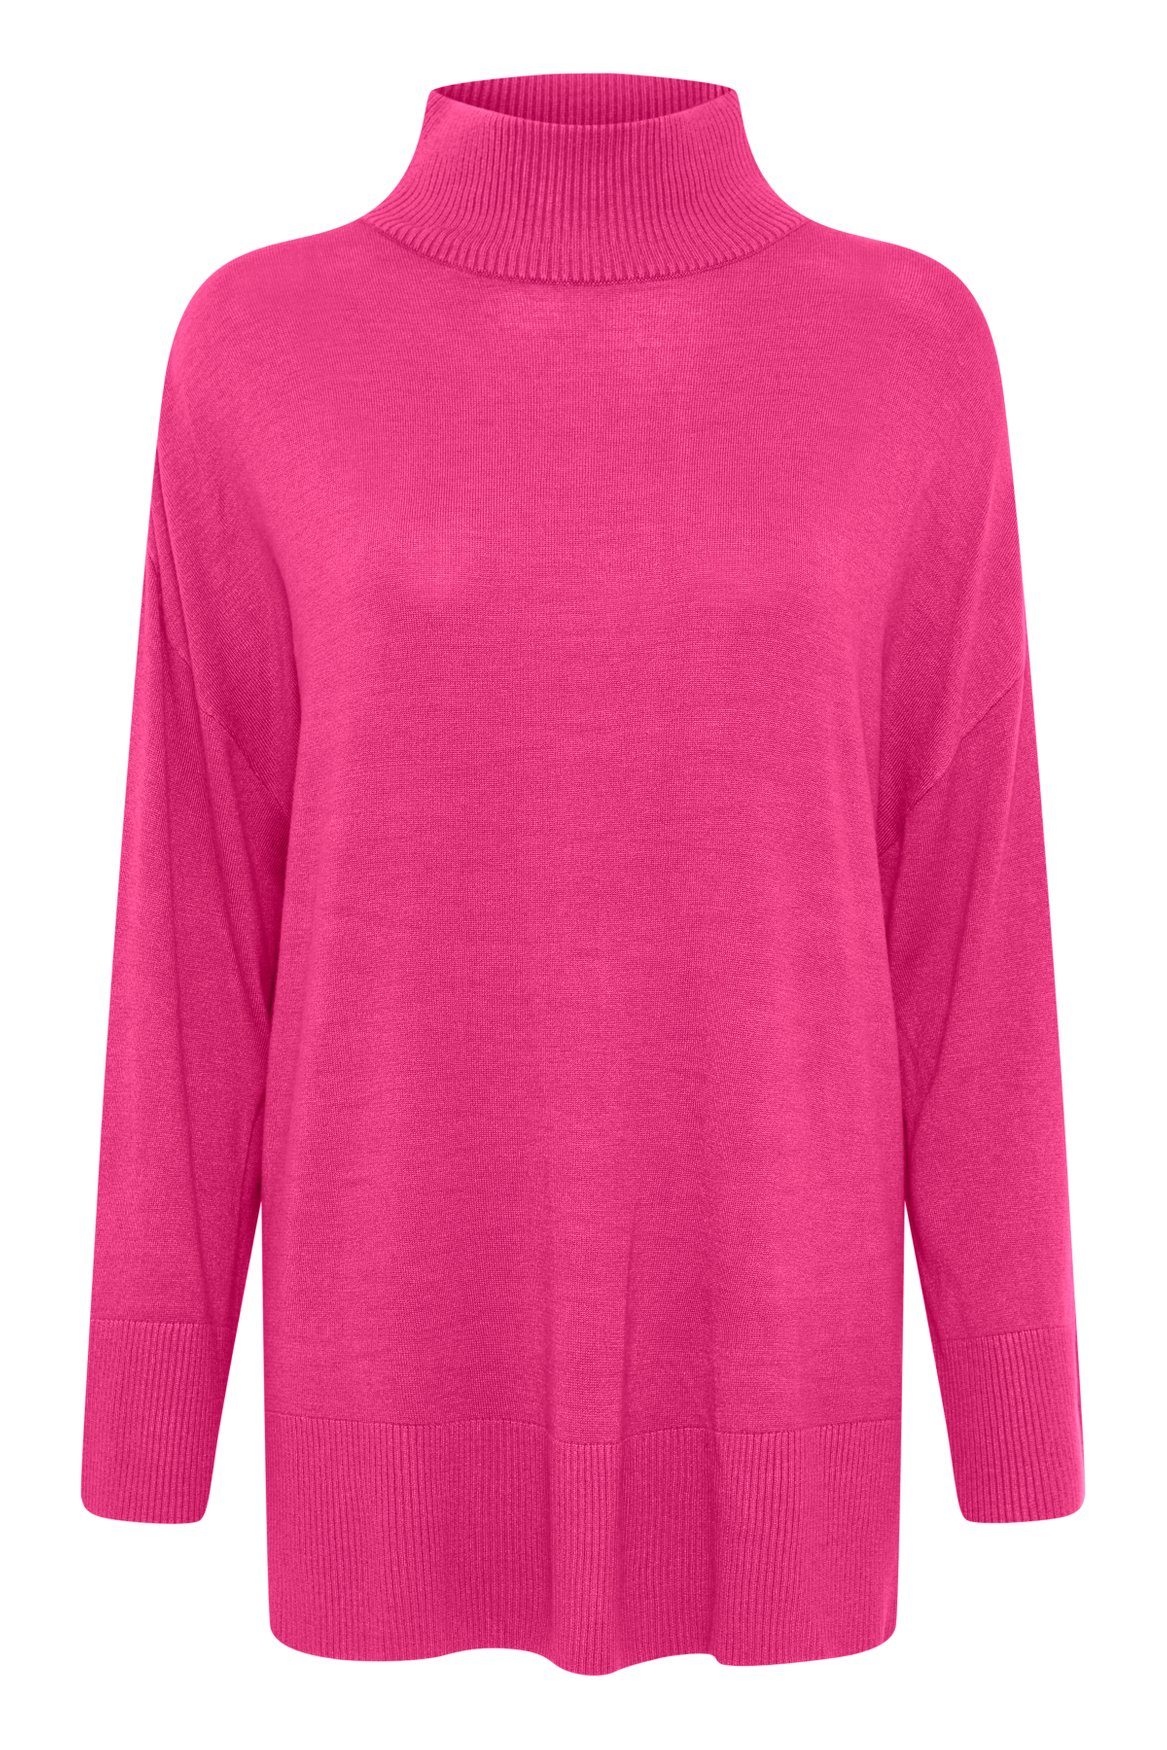 Langarm Feinstrick BYMMPIMBA1 Strickpullover b.young in Pullover Shirt 6263 Pink